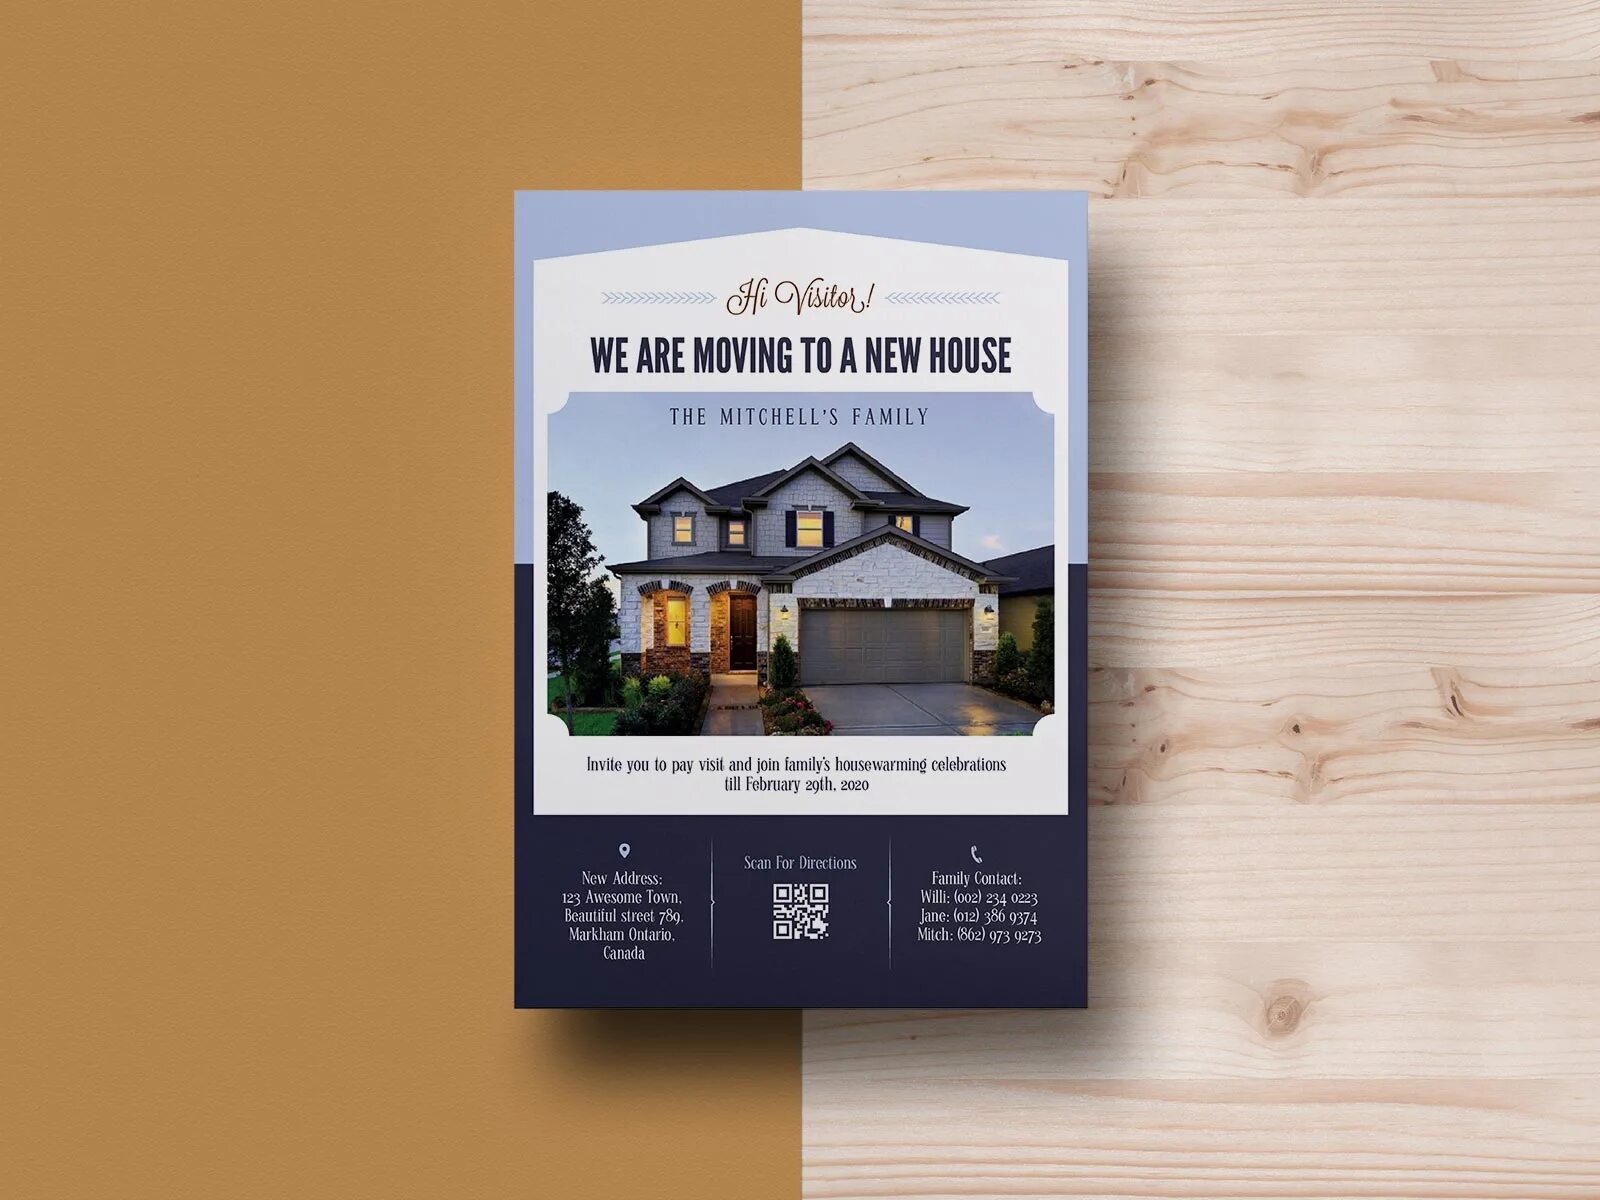 House Flyer. Billur HOUSEHOUSE Flayer. We have moved Flyer Designs. By 2025 we will move to a New House. We have moved to a new